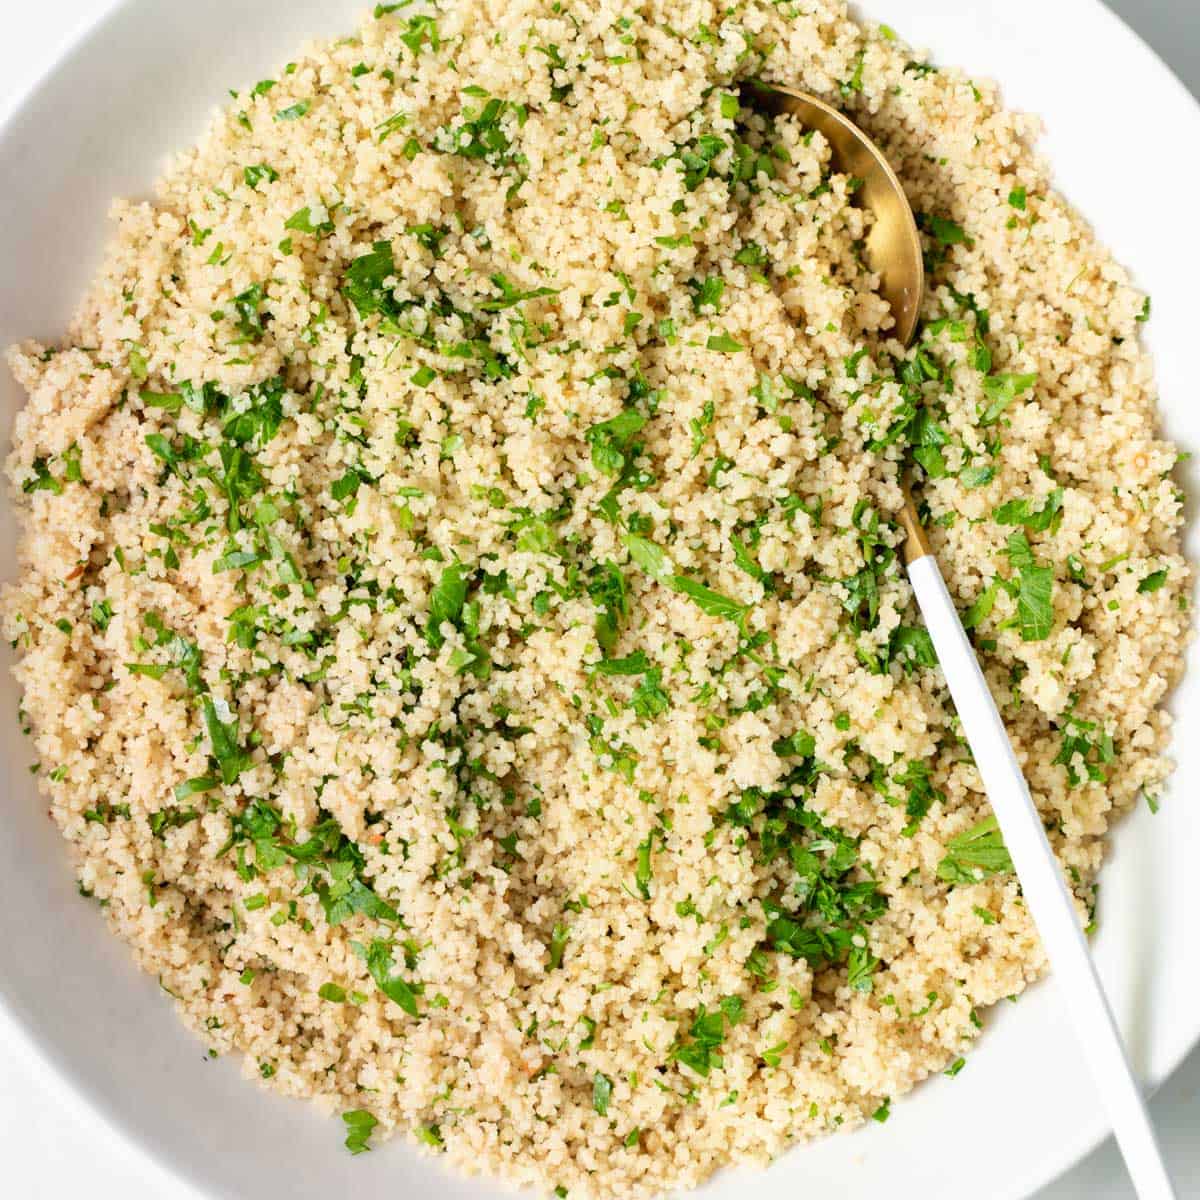 top view of a round plate of cooked couscous with chopped parsley and spoon on plate over couscous